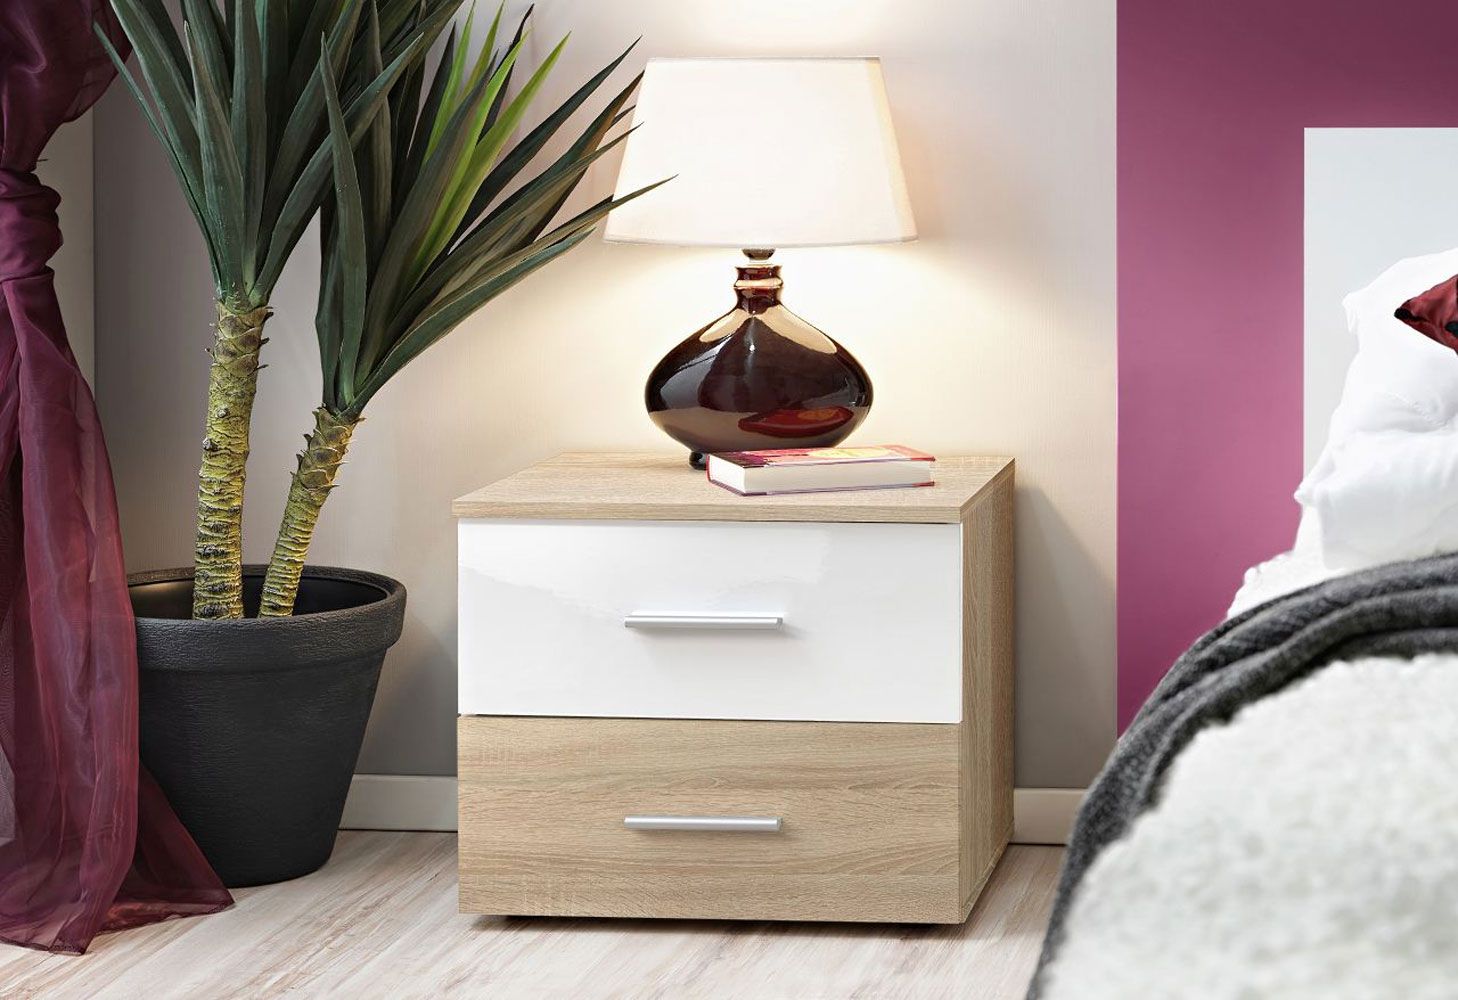 Salmeli 30 bedside cabinet, color: white / oak Sonoma - Dimensions: 40 x 50 x 40 cm (H x W x D), with two drawers